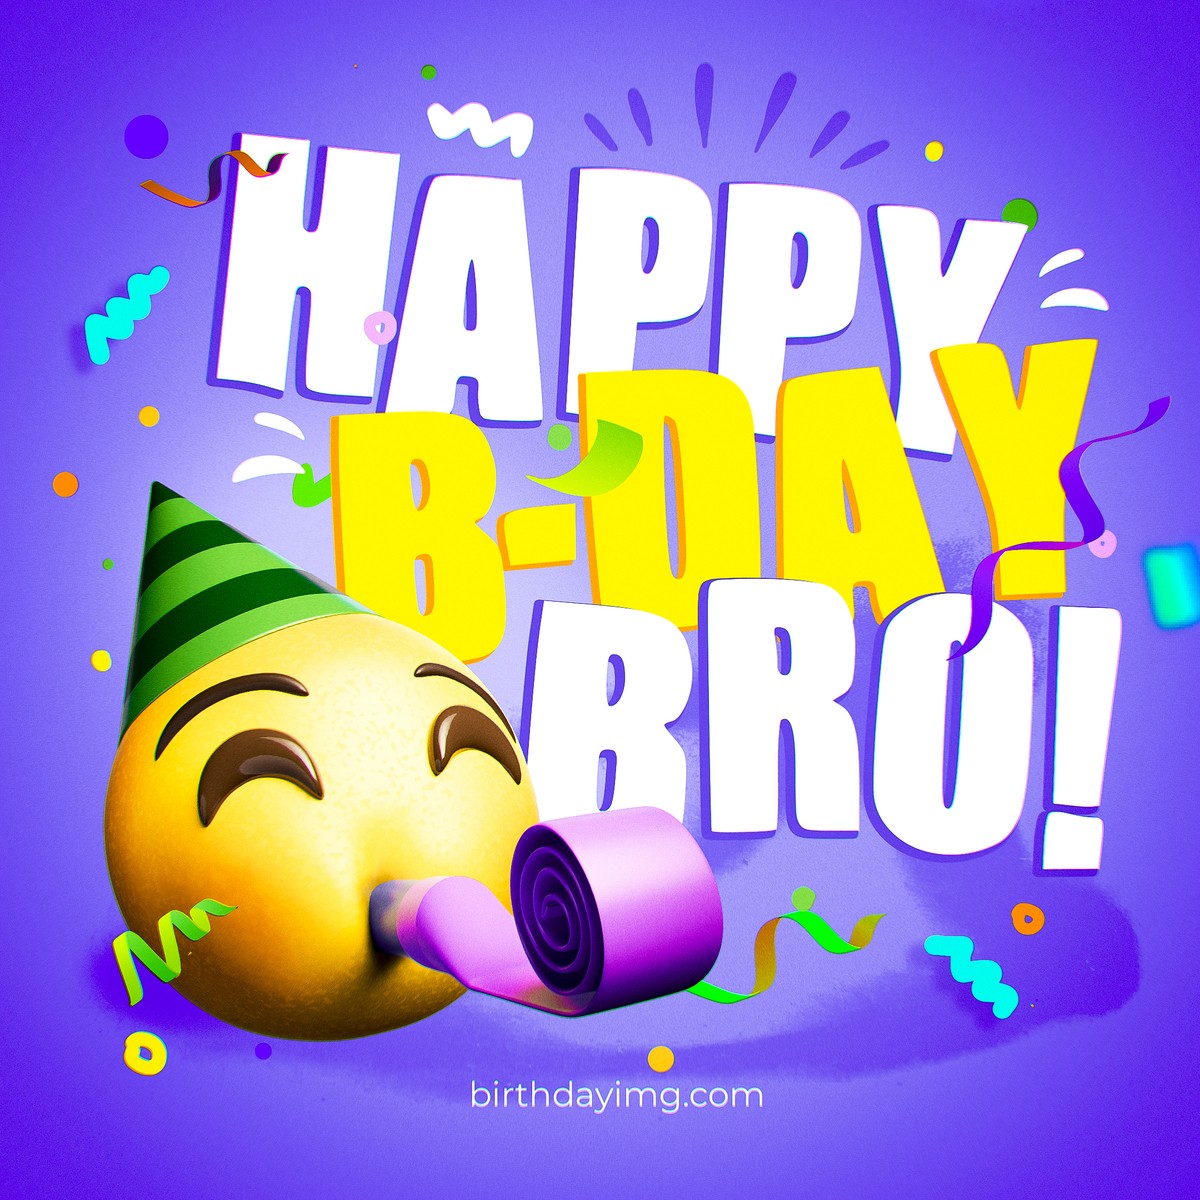 Free Creative Birthday Picture for Brother - birthdayimg.com